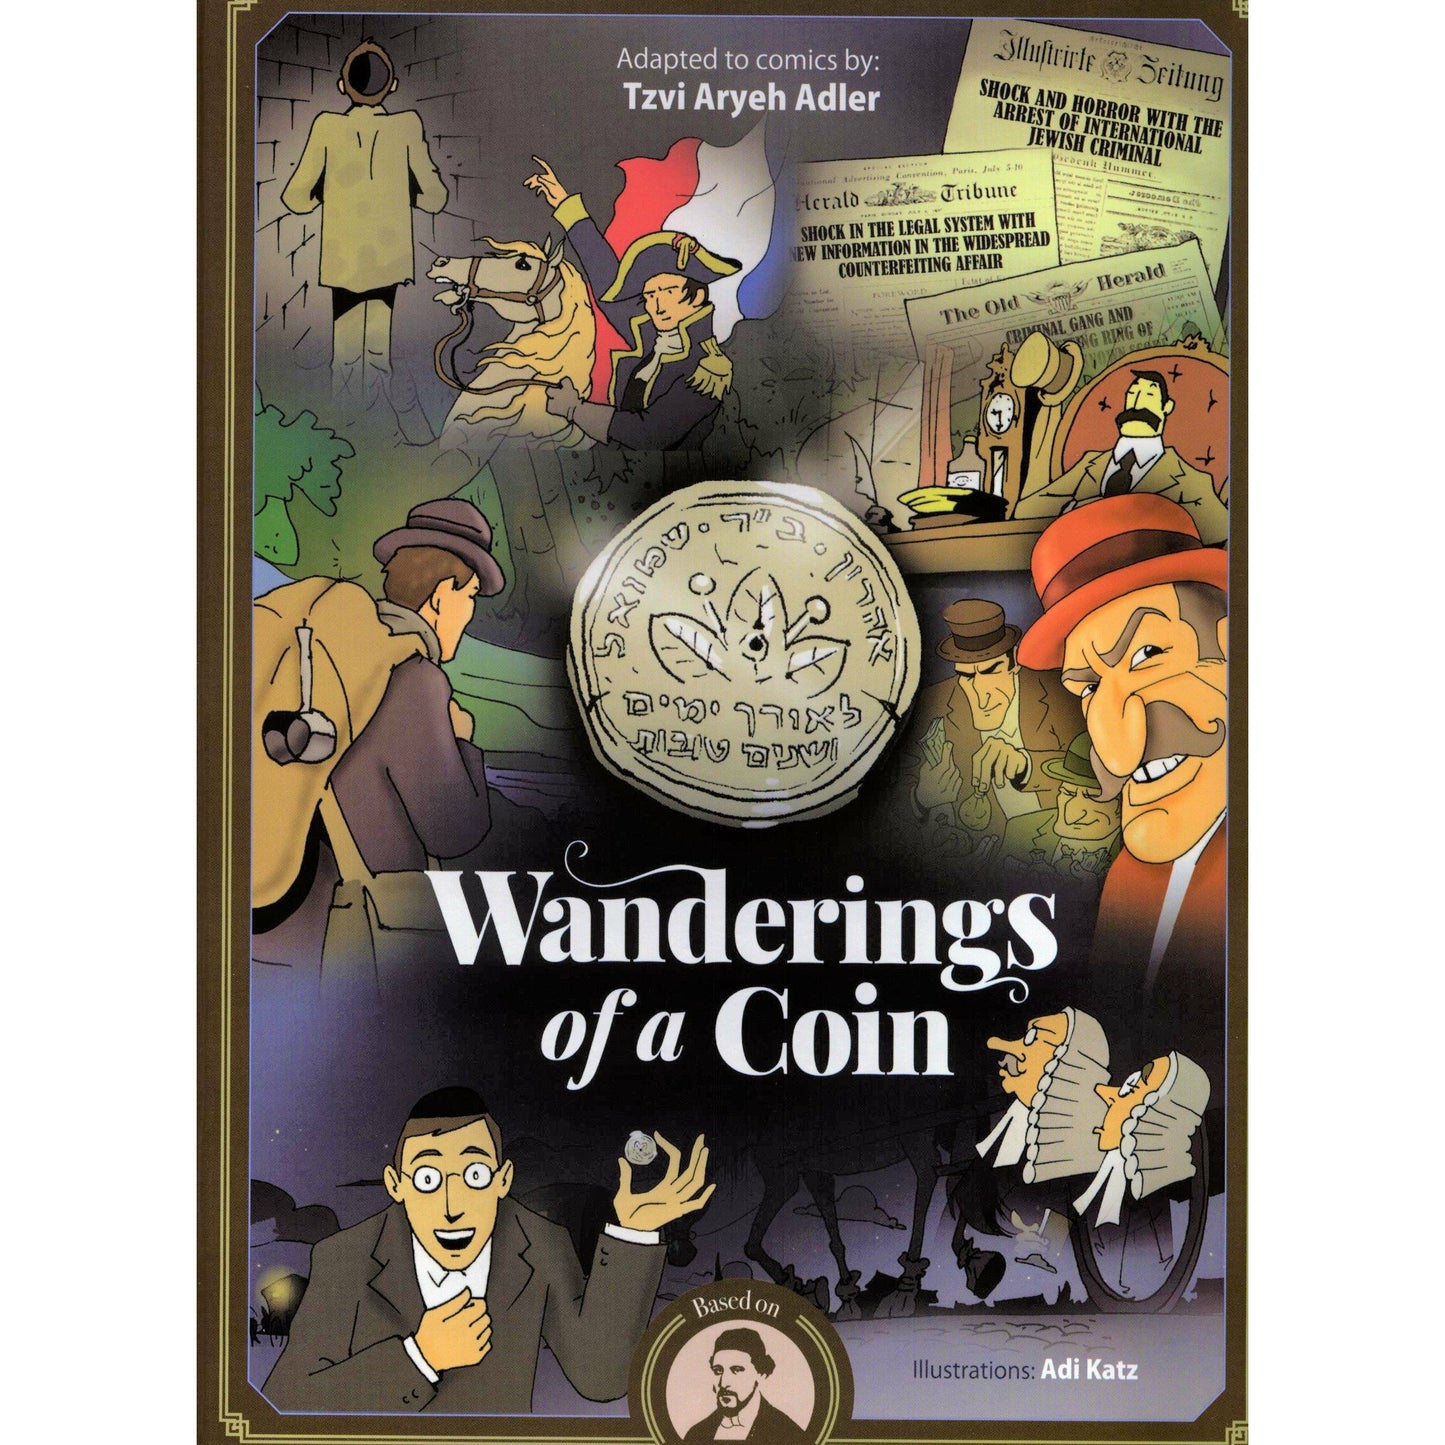 Wanderings of a Coin